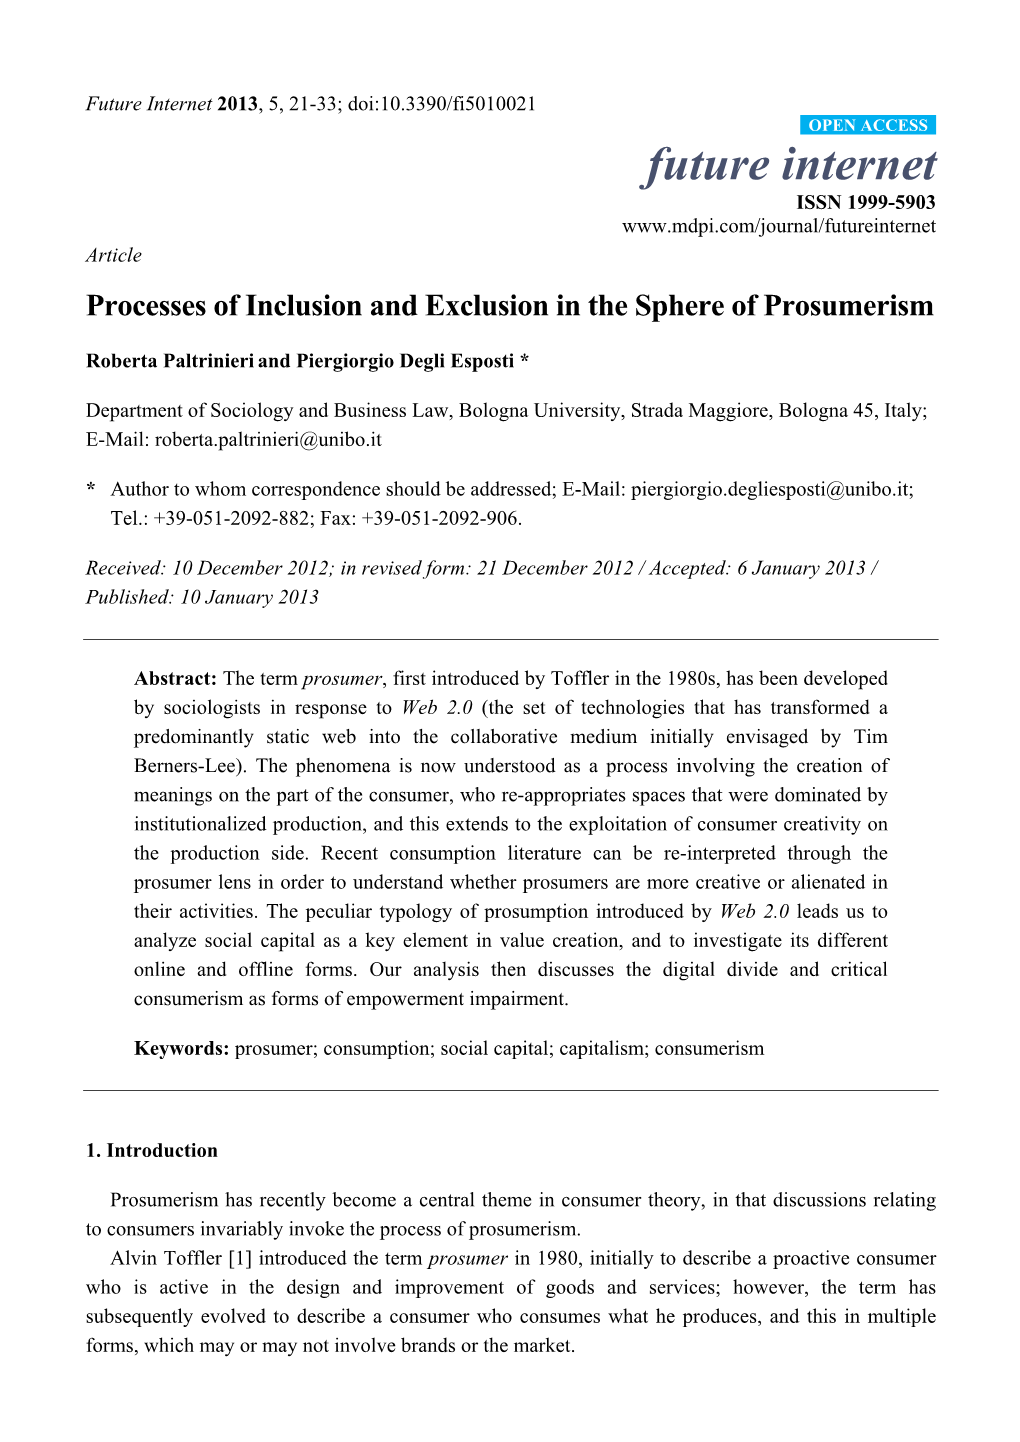 Processes of Inclusion and Exclusion in the Sphere of Prosumerism